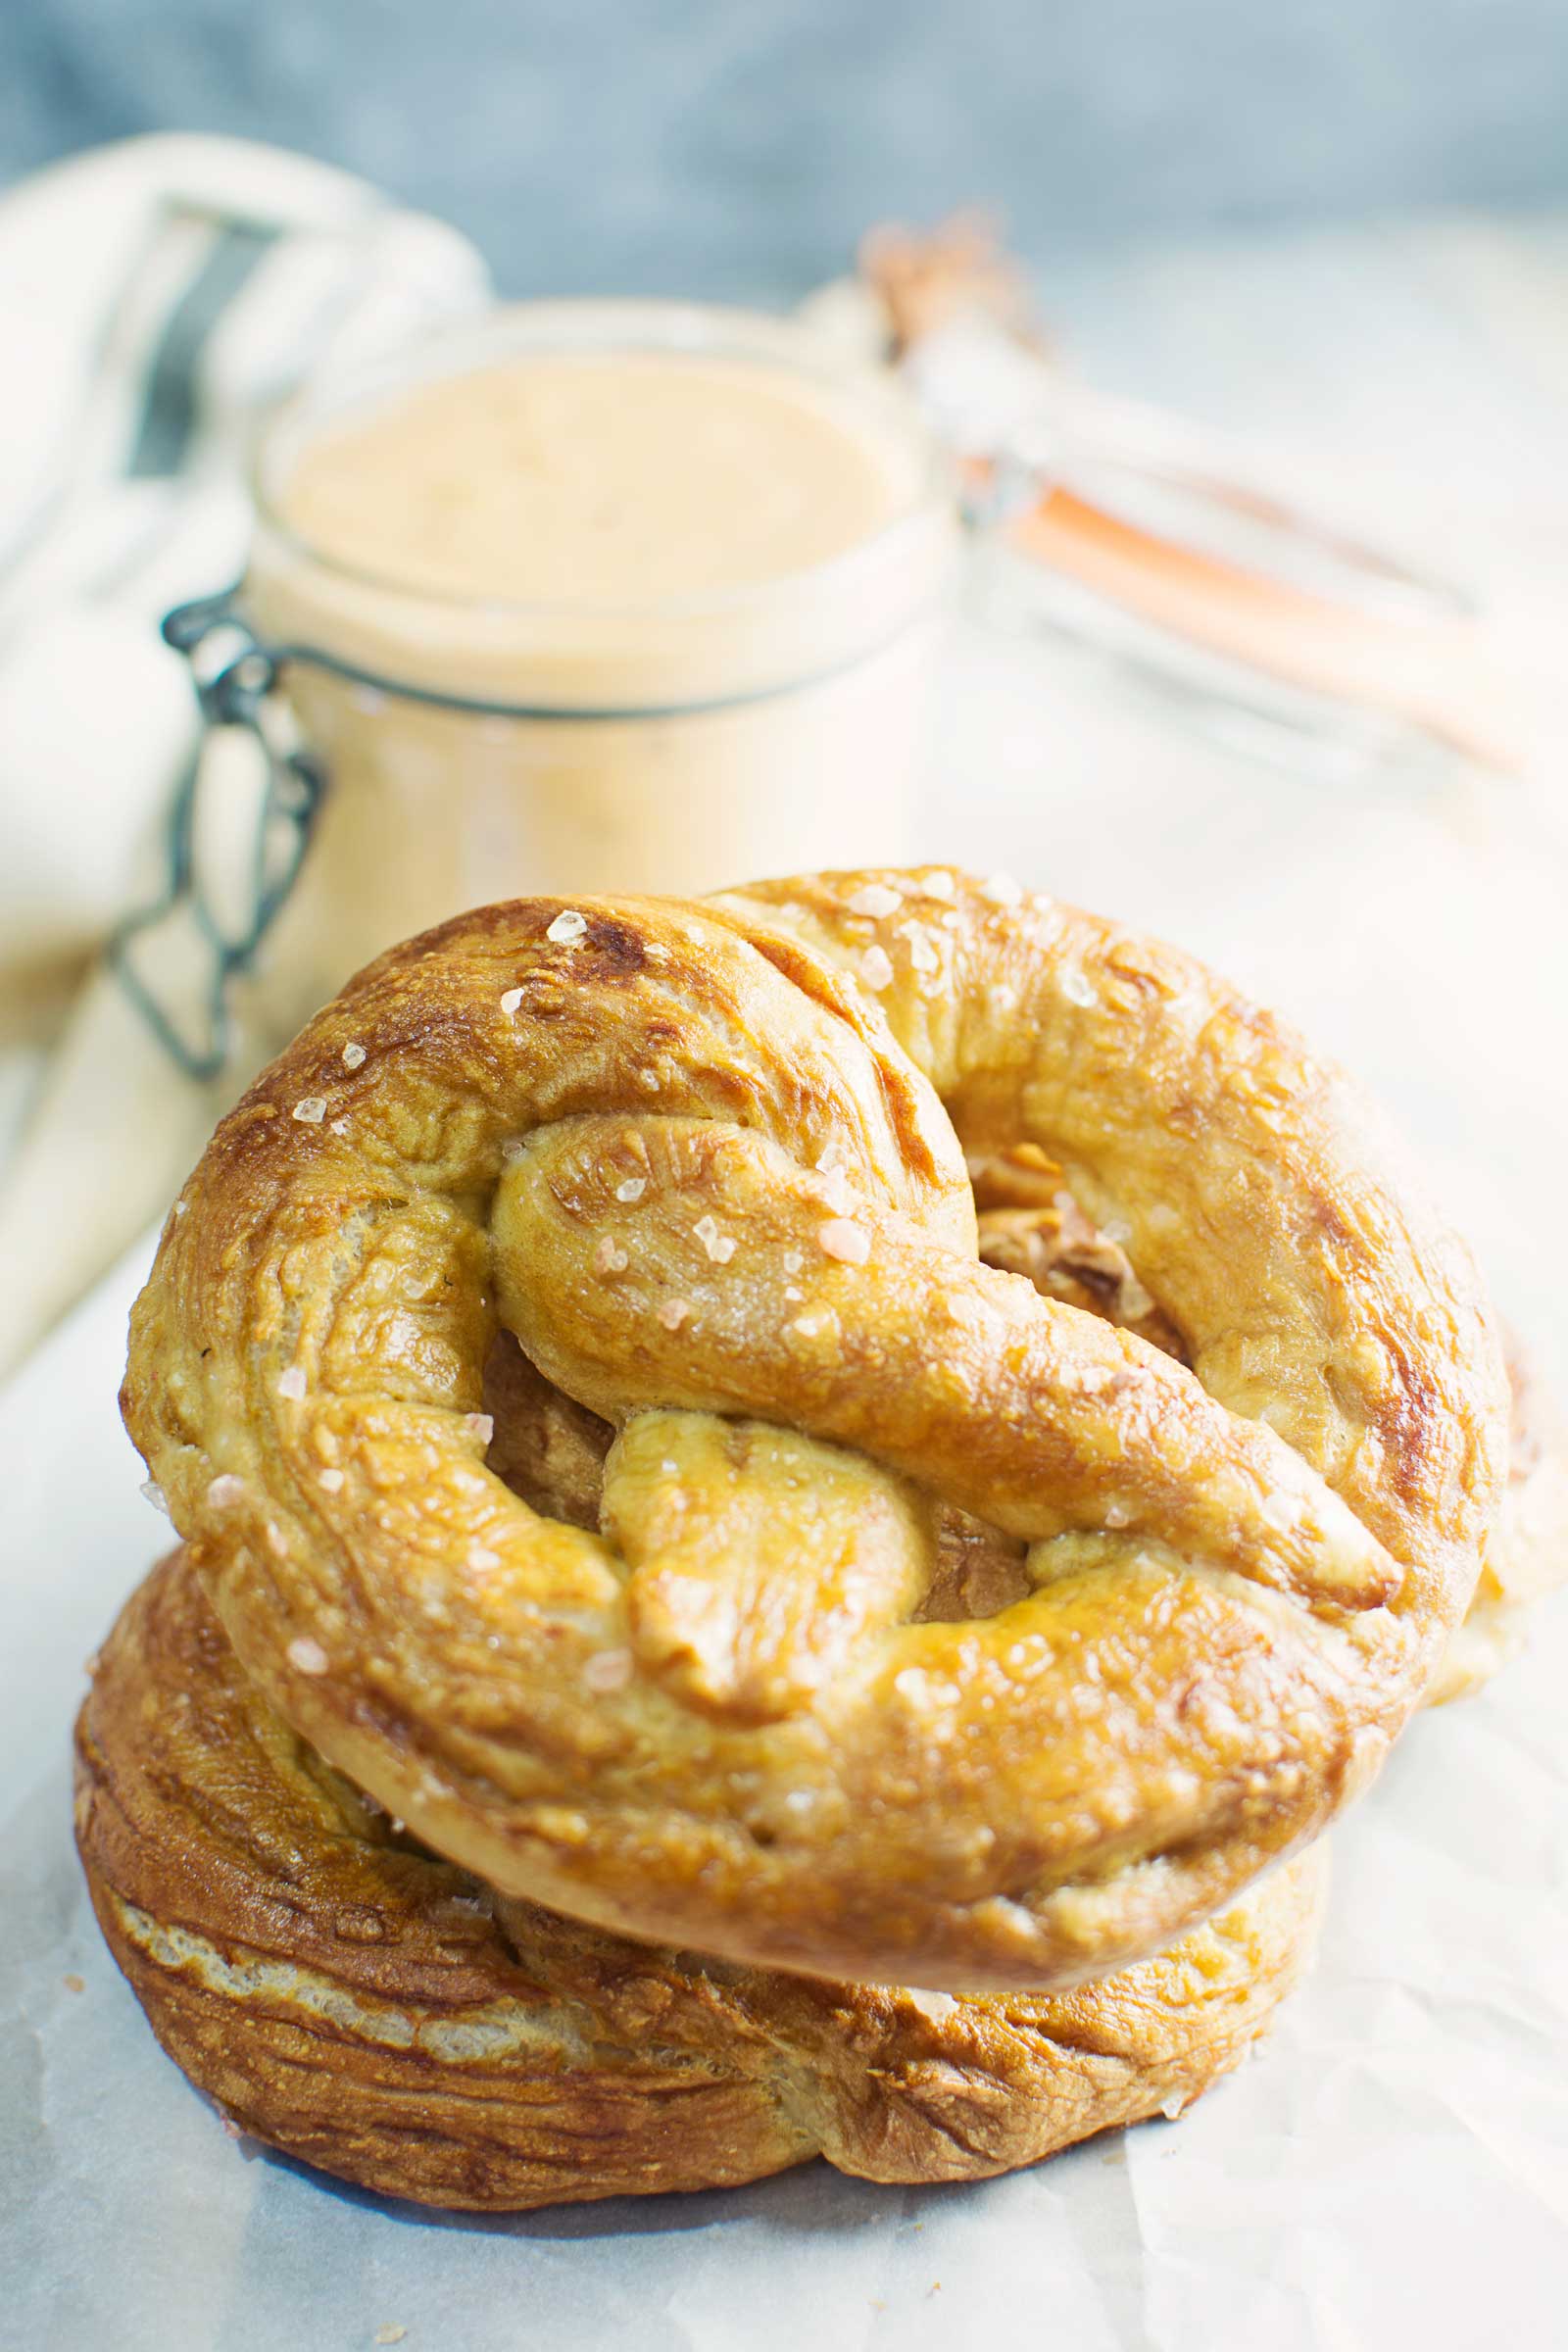 Homemade Pretzels! Soft, buttery with a perfectly chewy crust. Perfect for a snack or party food any time. Recipe @LittleFiggyFood